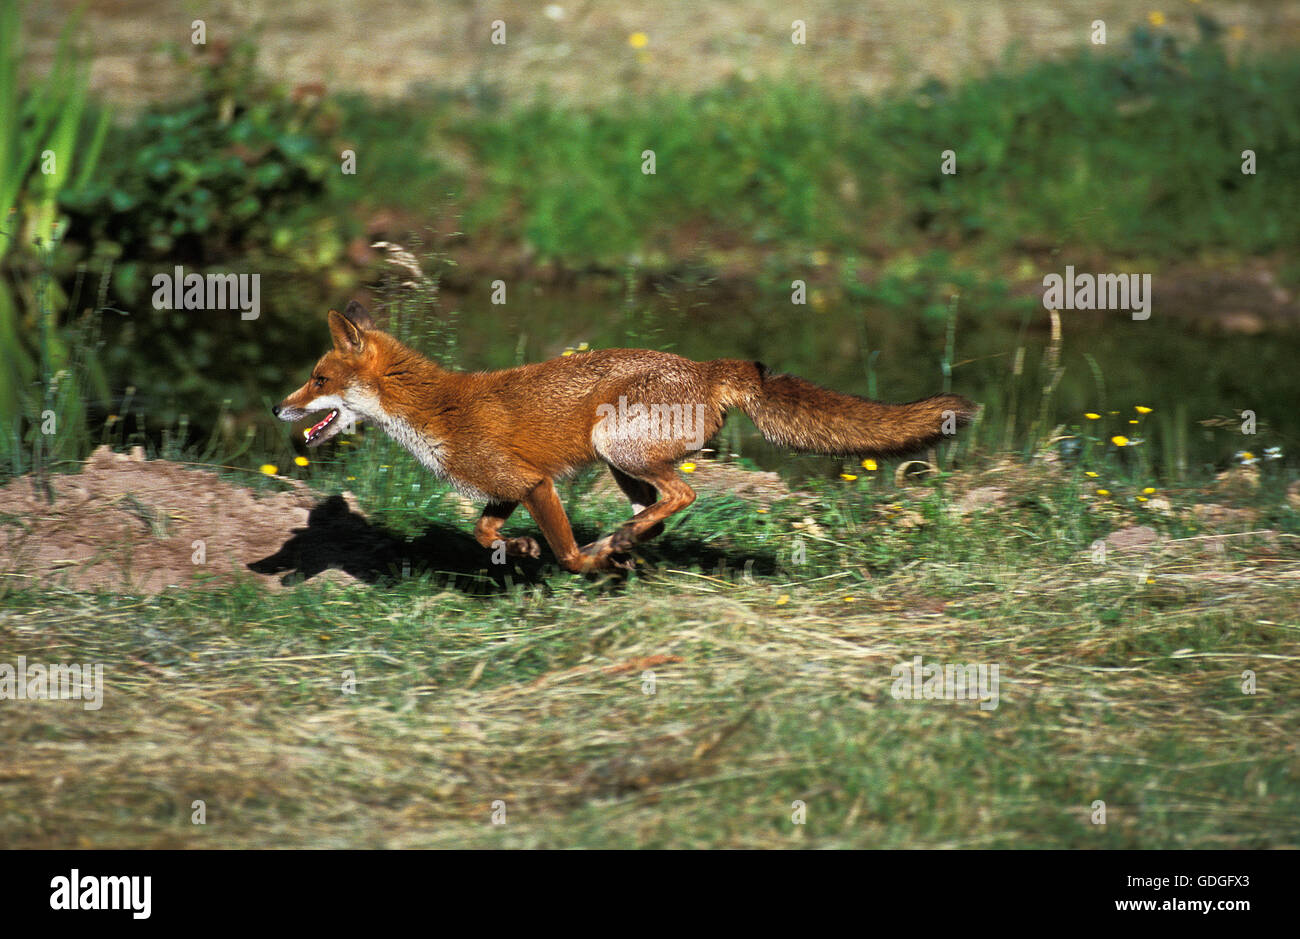 Red Fox, vulpes vulpes, adulti in esecuzione, Normandia Foto Stock